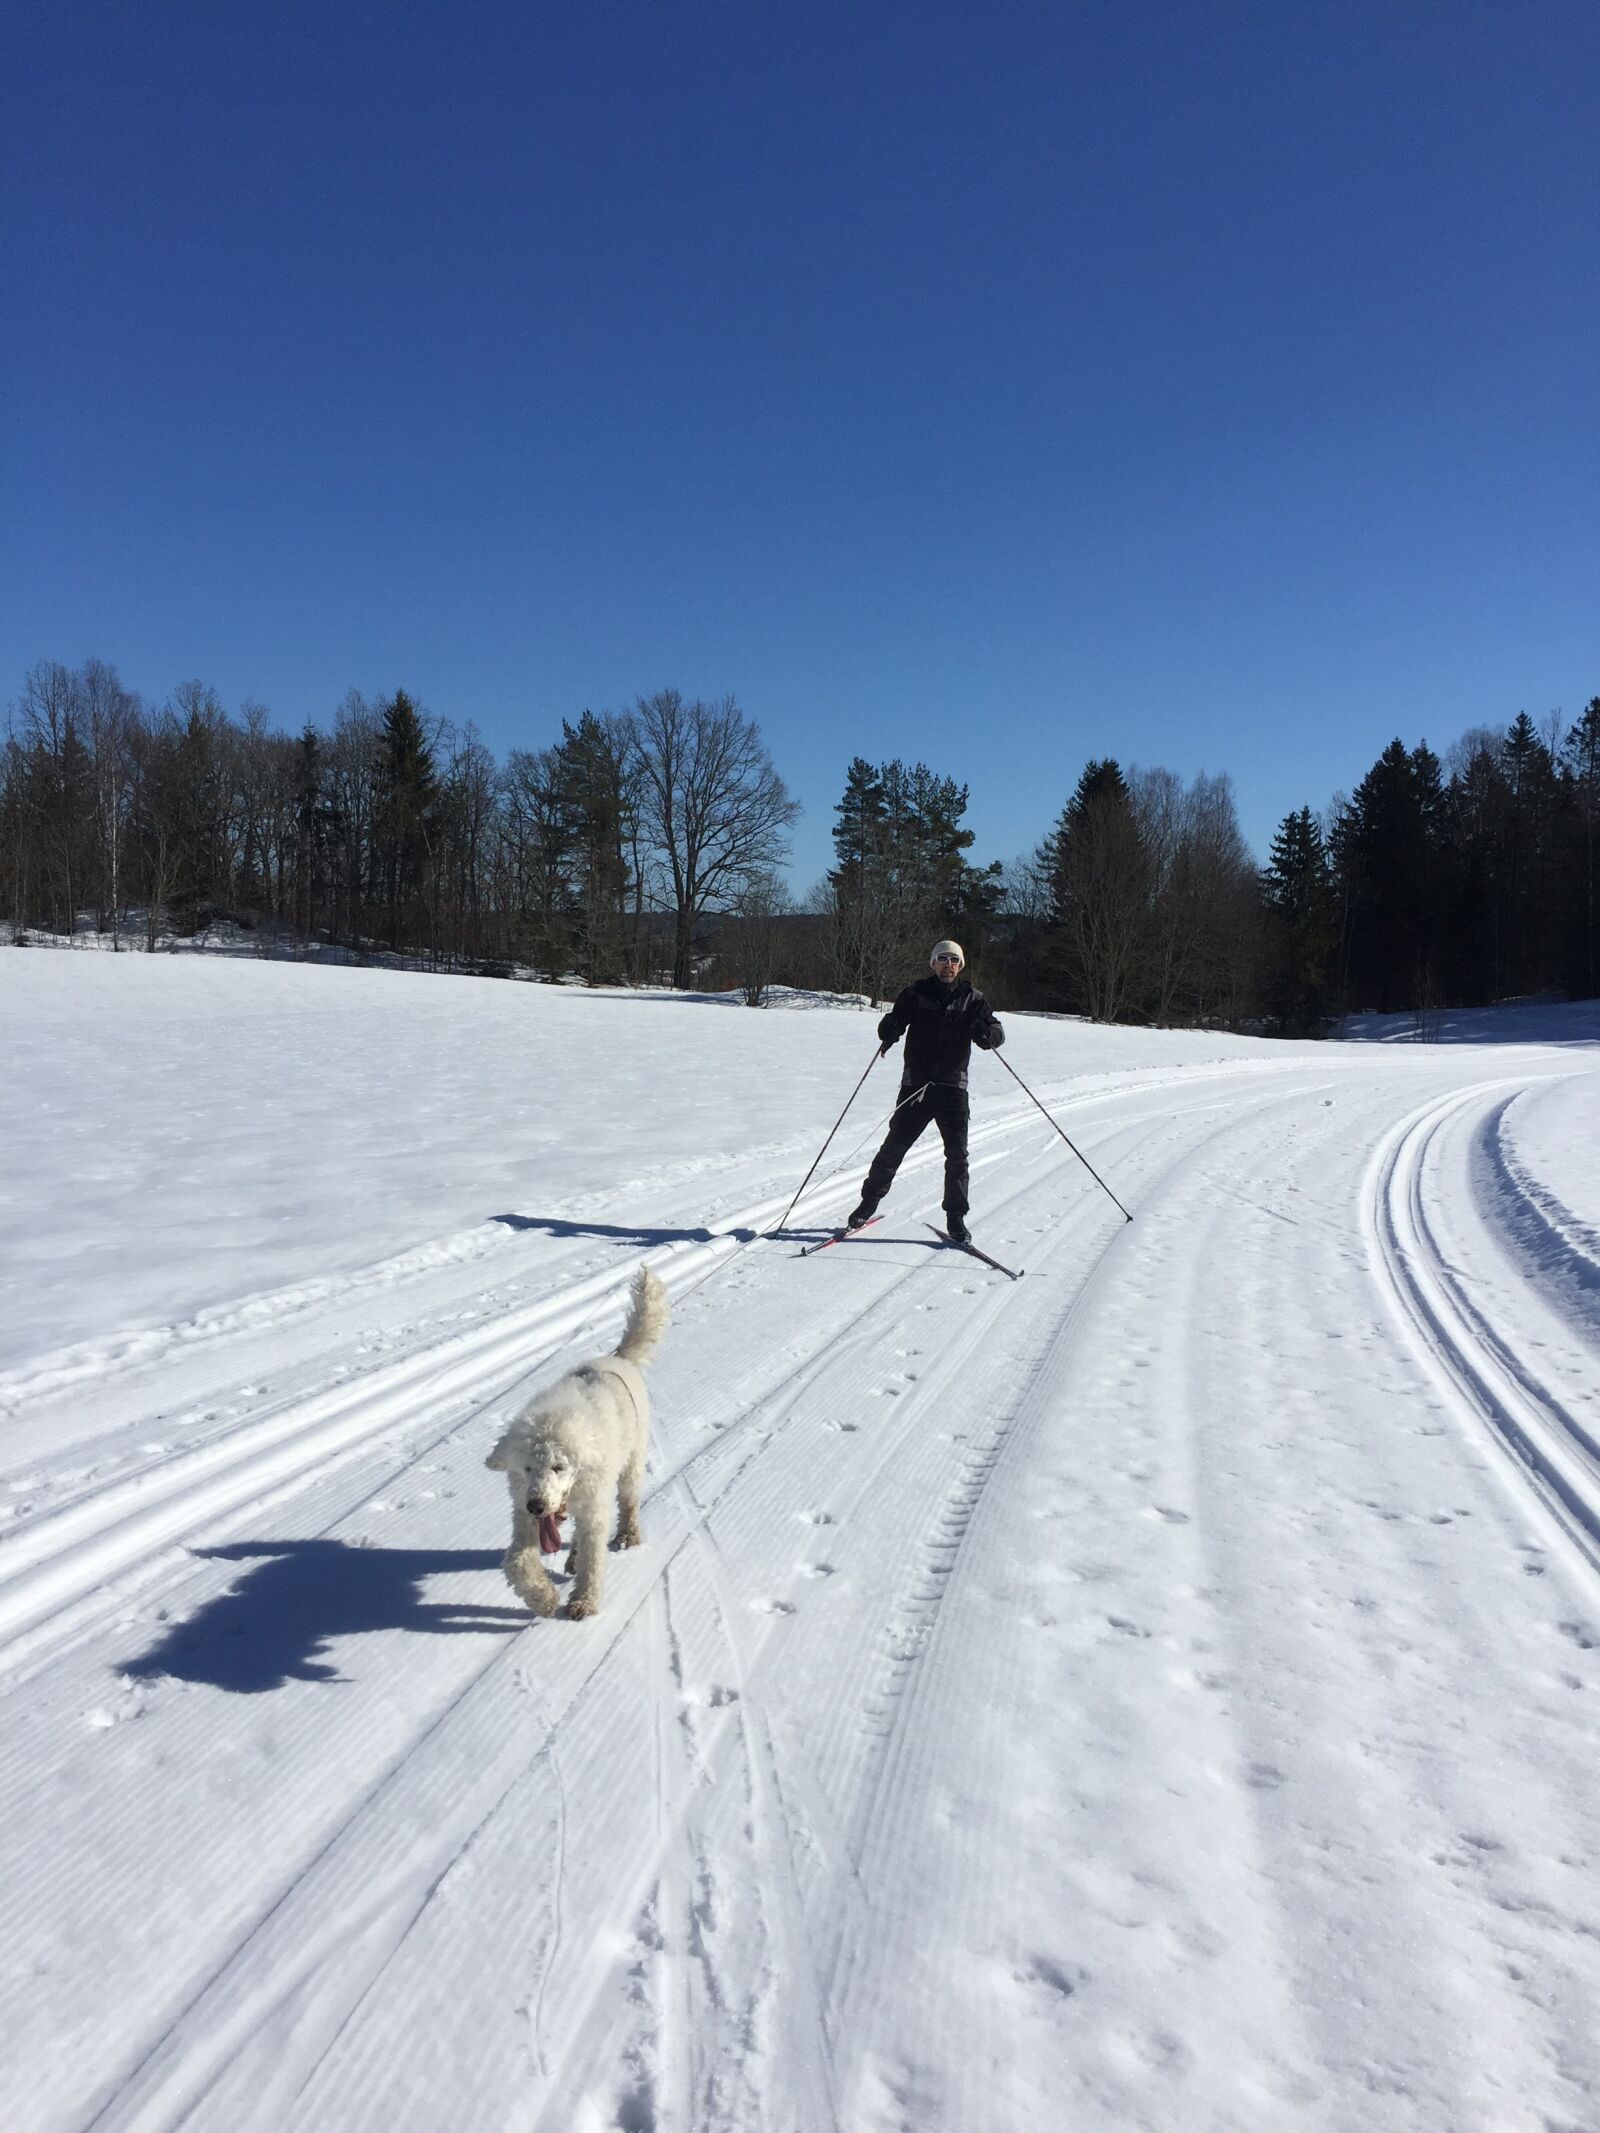 Apple iPhone 6 + iPhone 6 back camera 4.15mm f/2.2 sample photo. Dog, skiing, snow photography